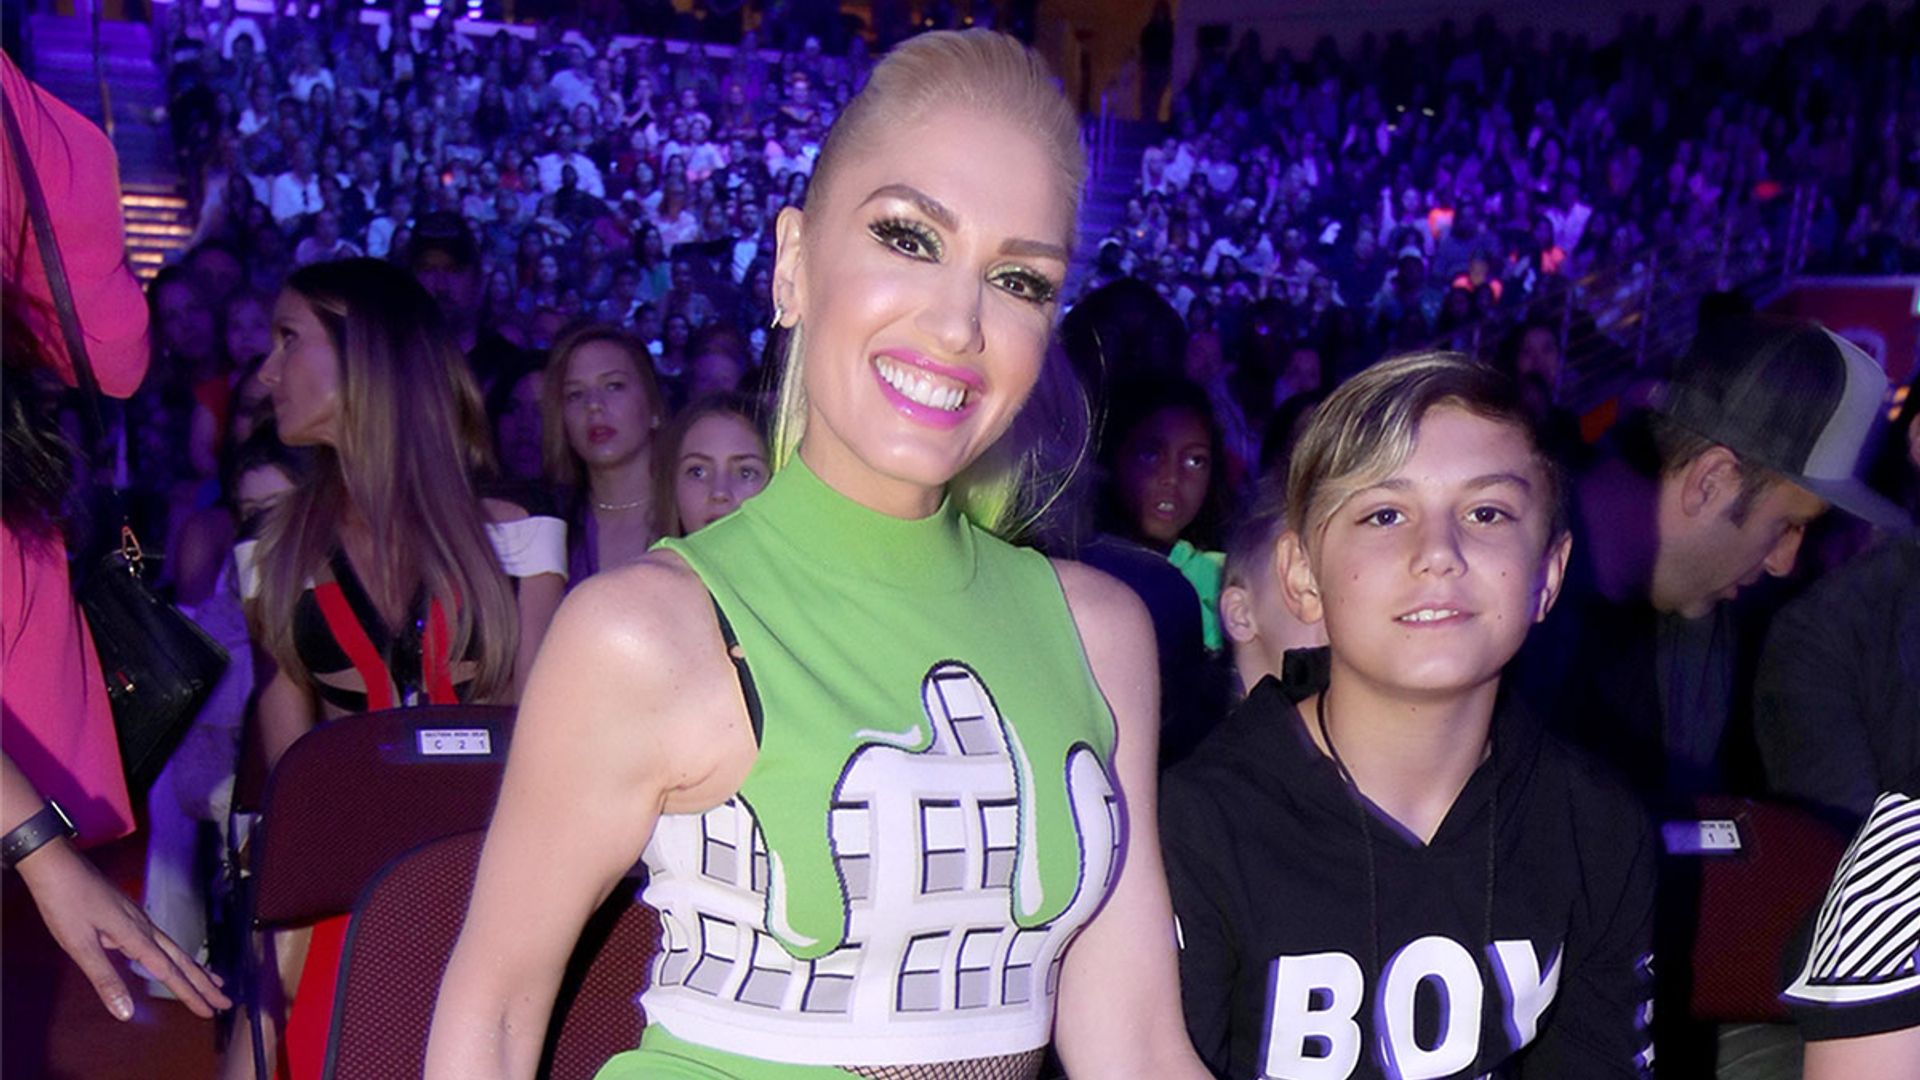 gwen stefani and son kingston at event wearing green